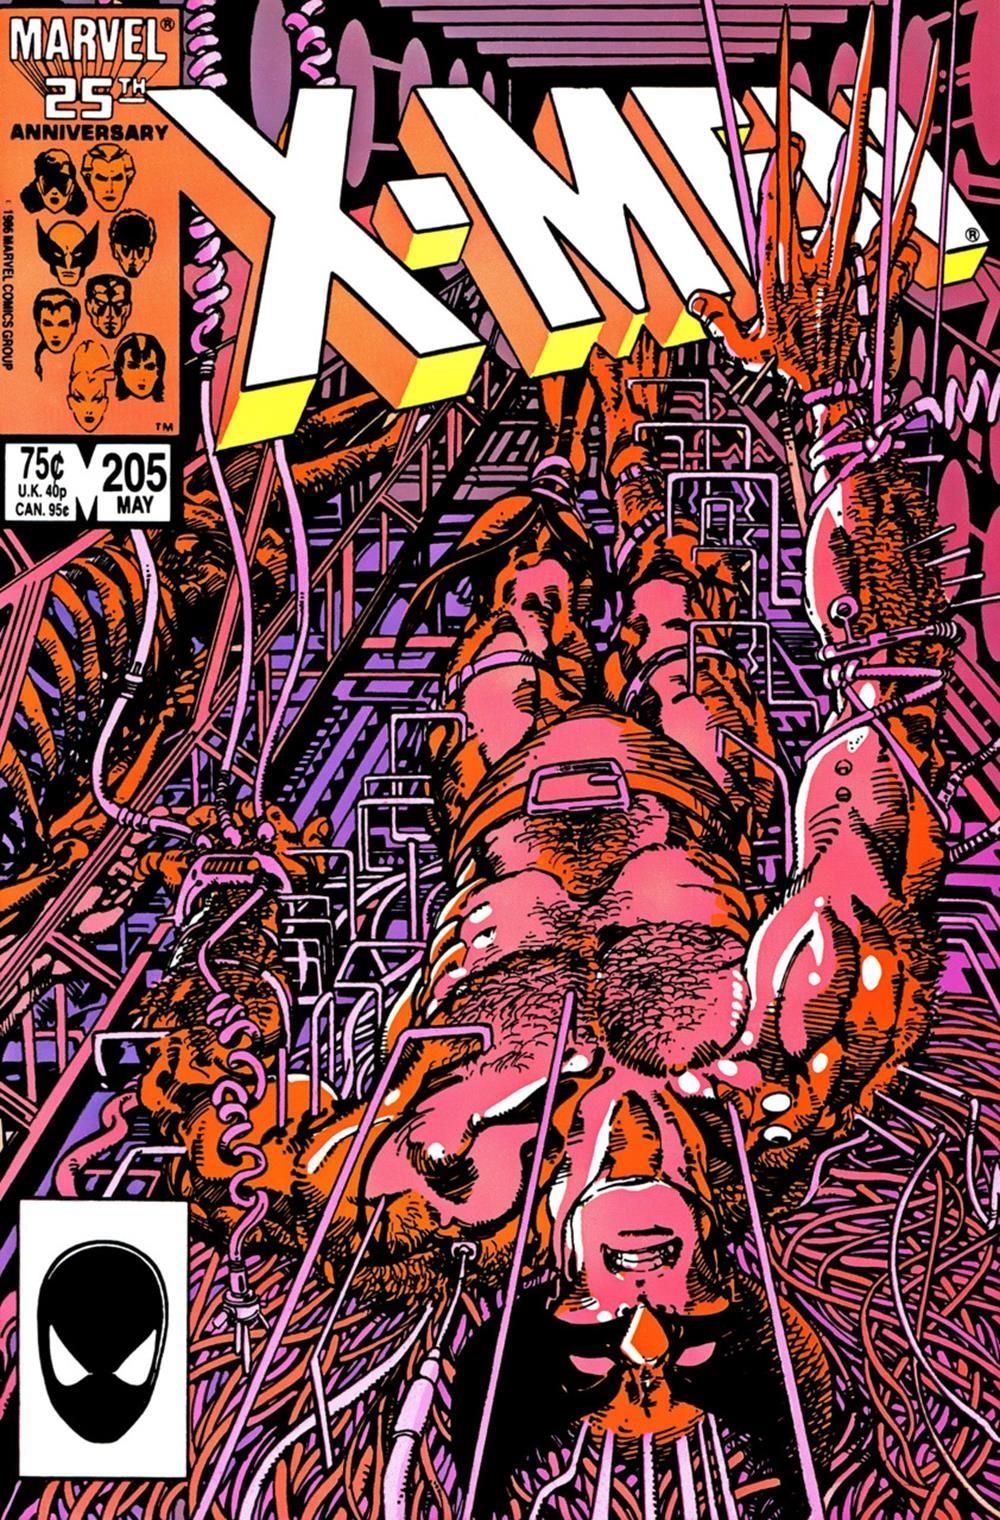 Barry Windsor-Smith returned to X-Men to draw this Wolverine one-shot story, "Wounded Wolf"